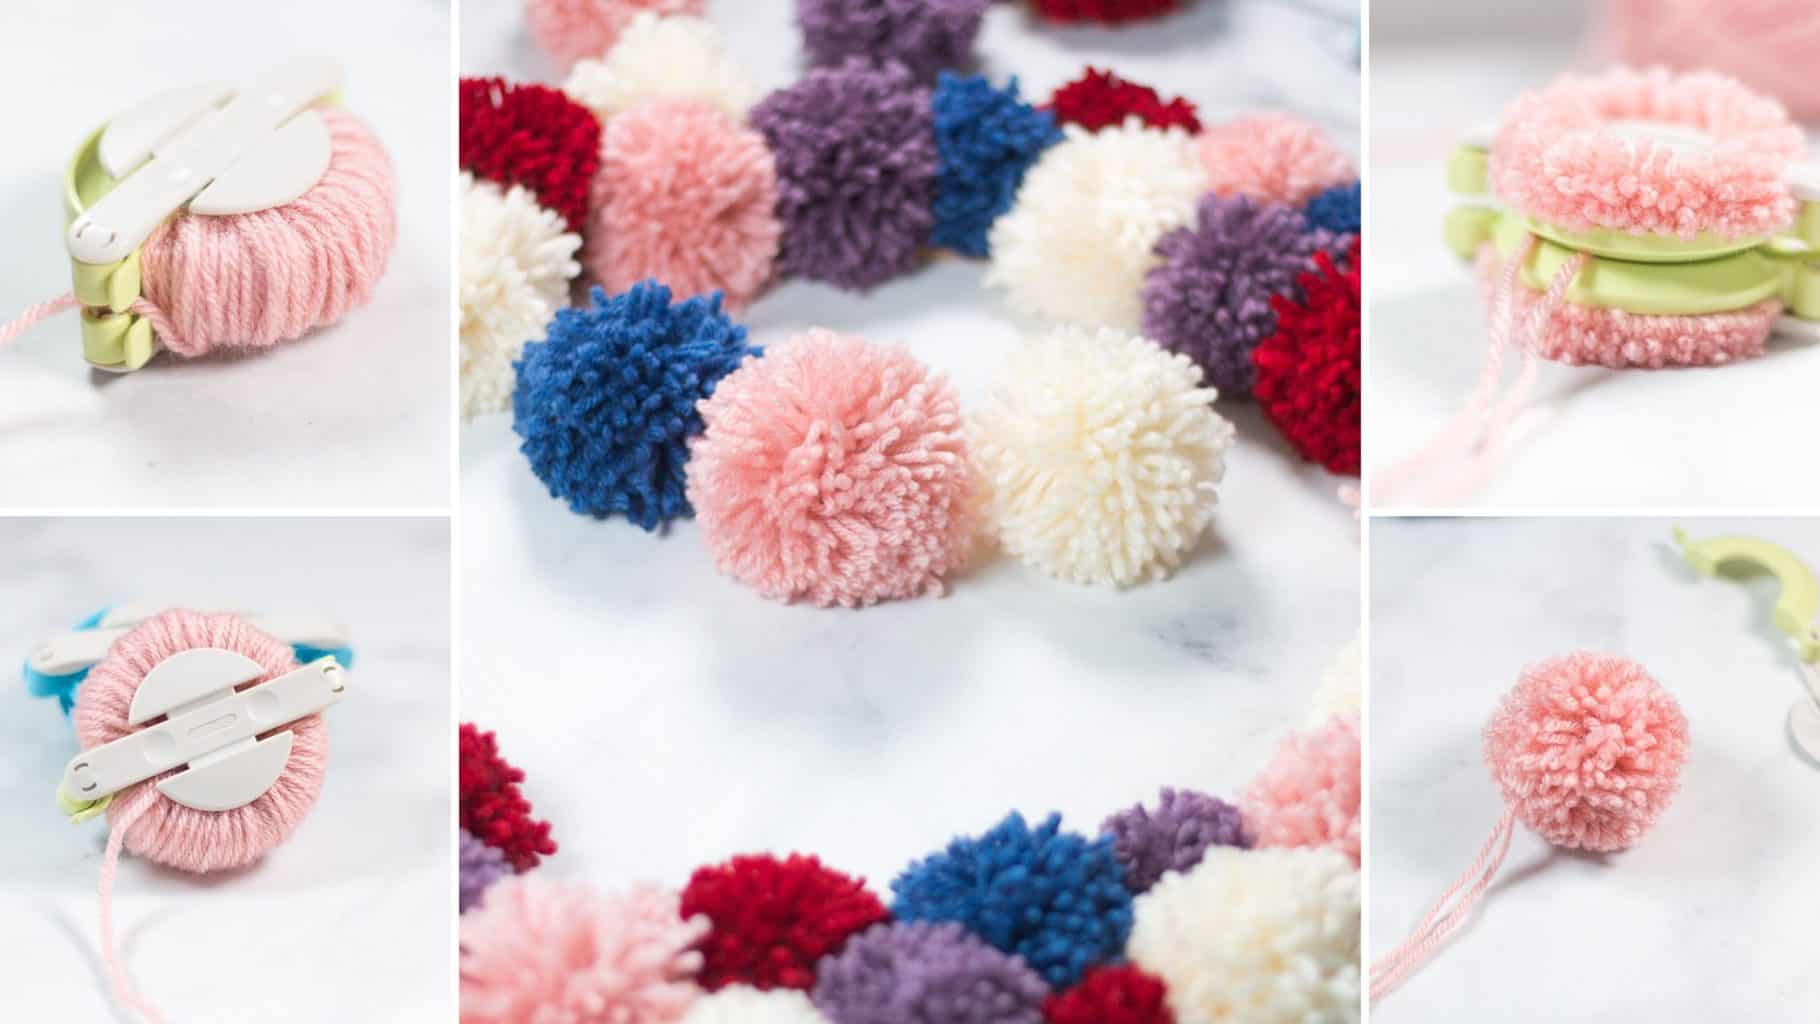 Learn how to Use a Pom Pom Maker - Easy Crochet Patterns